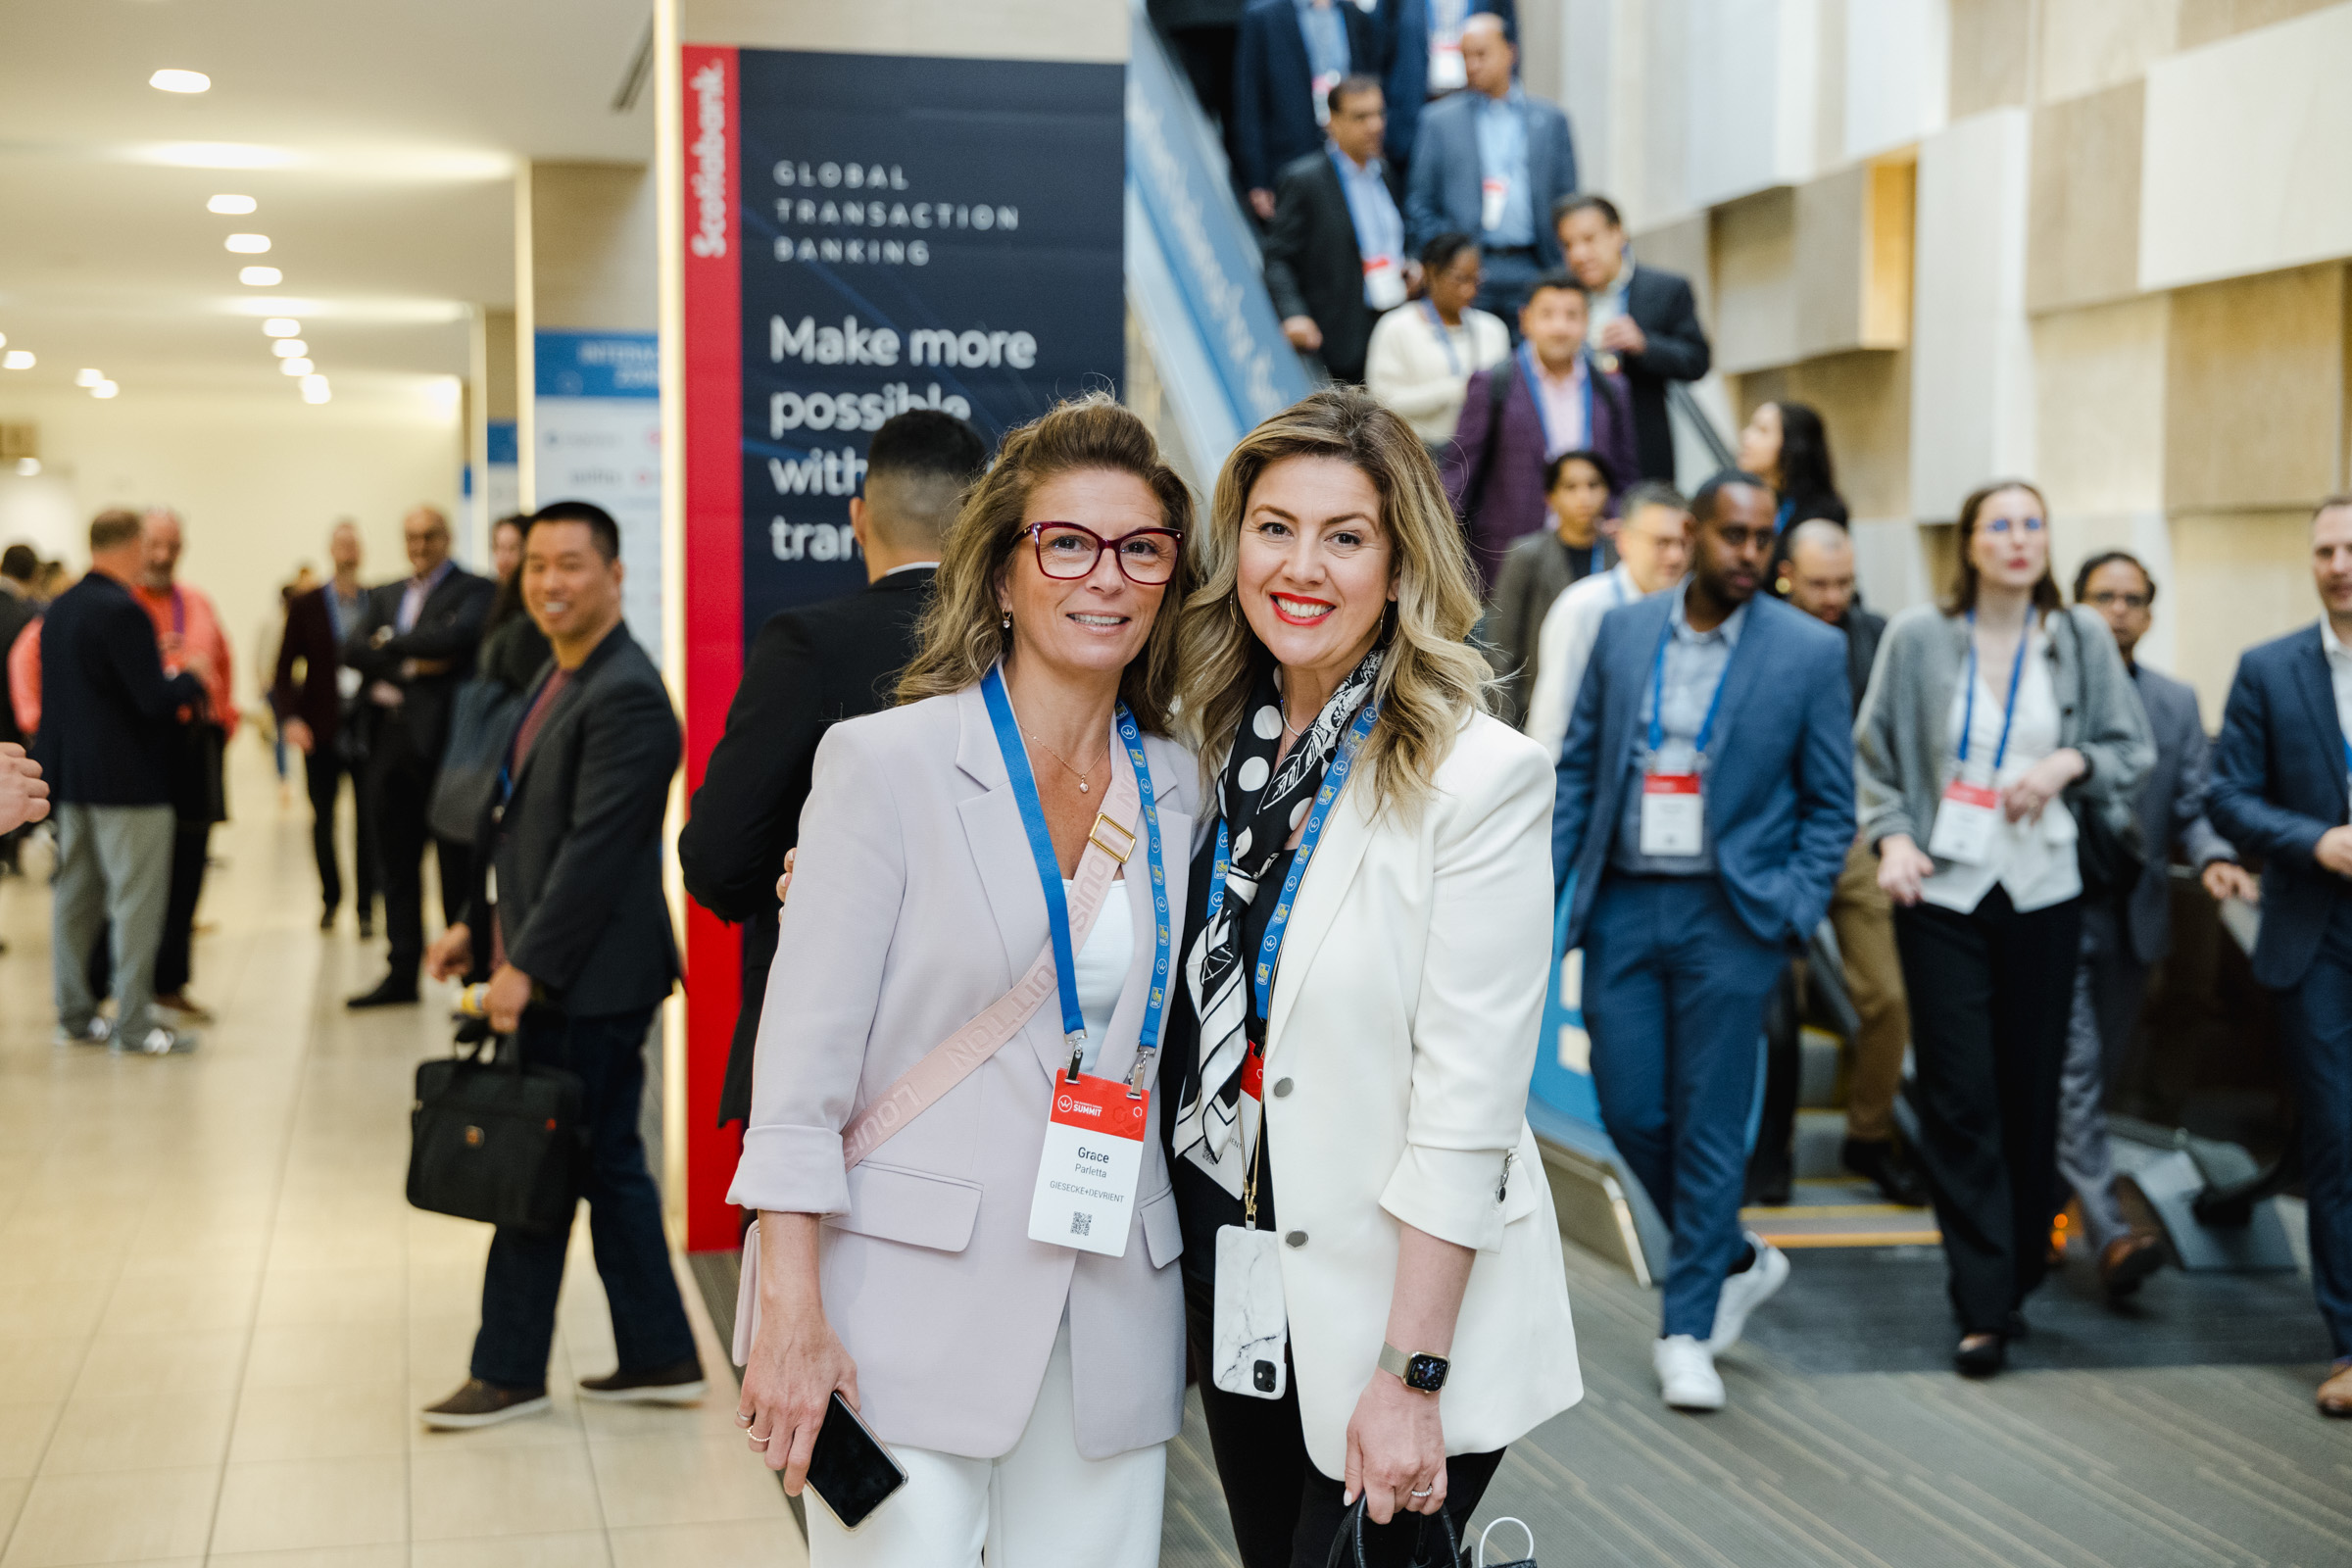 Two women in business attire pose for a photo at a professional event, captured by expert event photography, with a group of people and a sign for 'Global Transaction Banking' visible in the background.